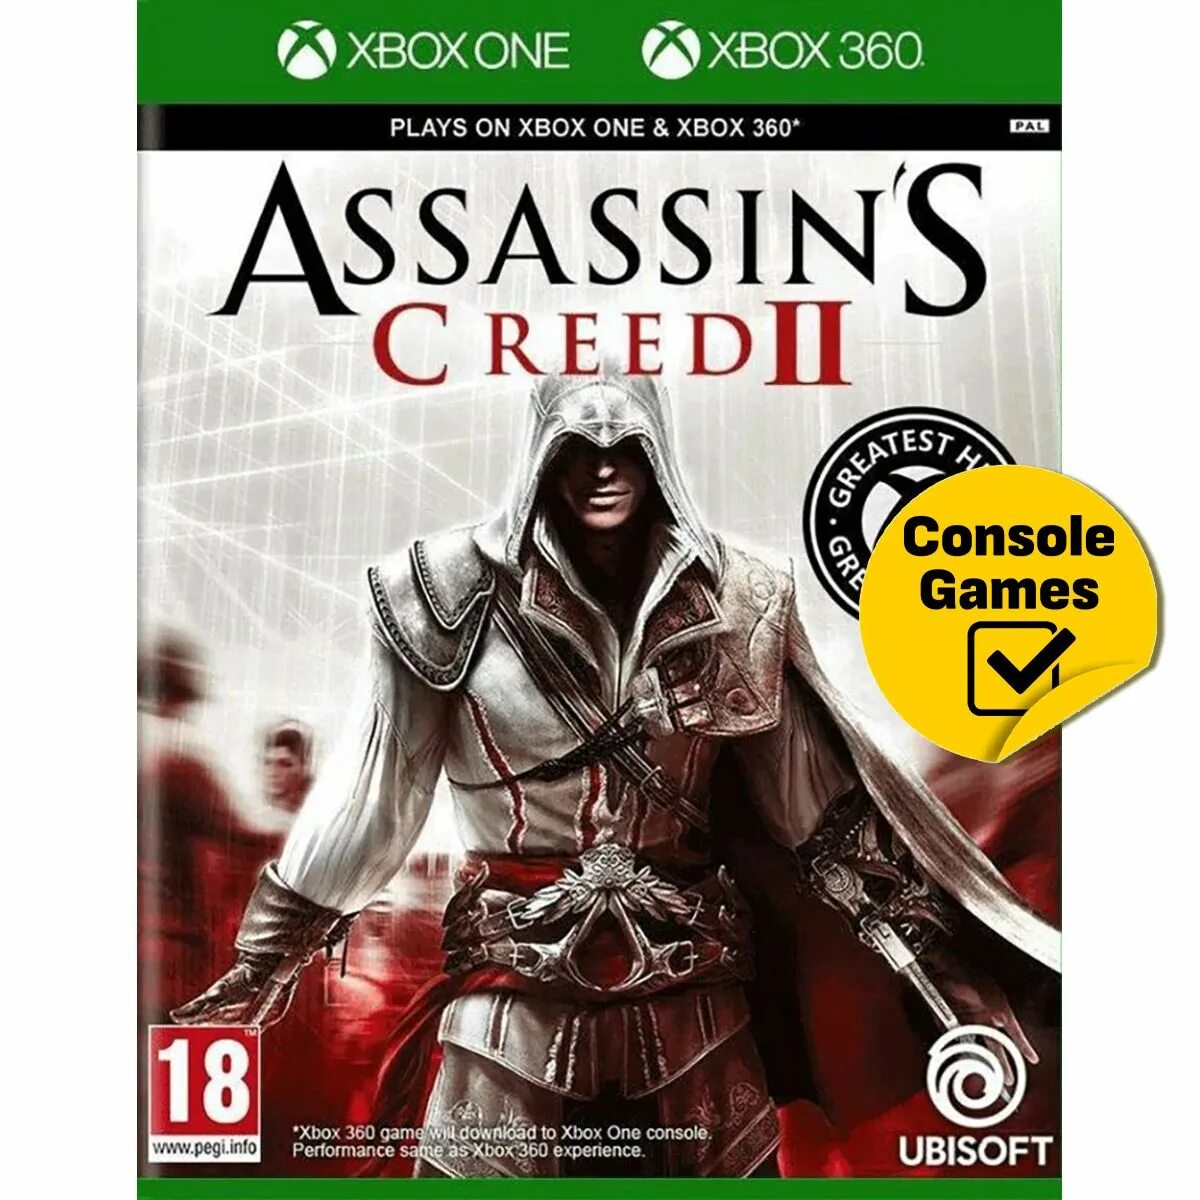 Assassin's Creed Xbox 360 диск. Ассасин Крид 2 на Xbox 360 диск. Ассасин Крид на Xbox 360. Assassins Creed 2 Xbox 360 обложка.